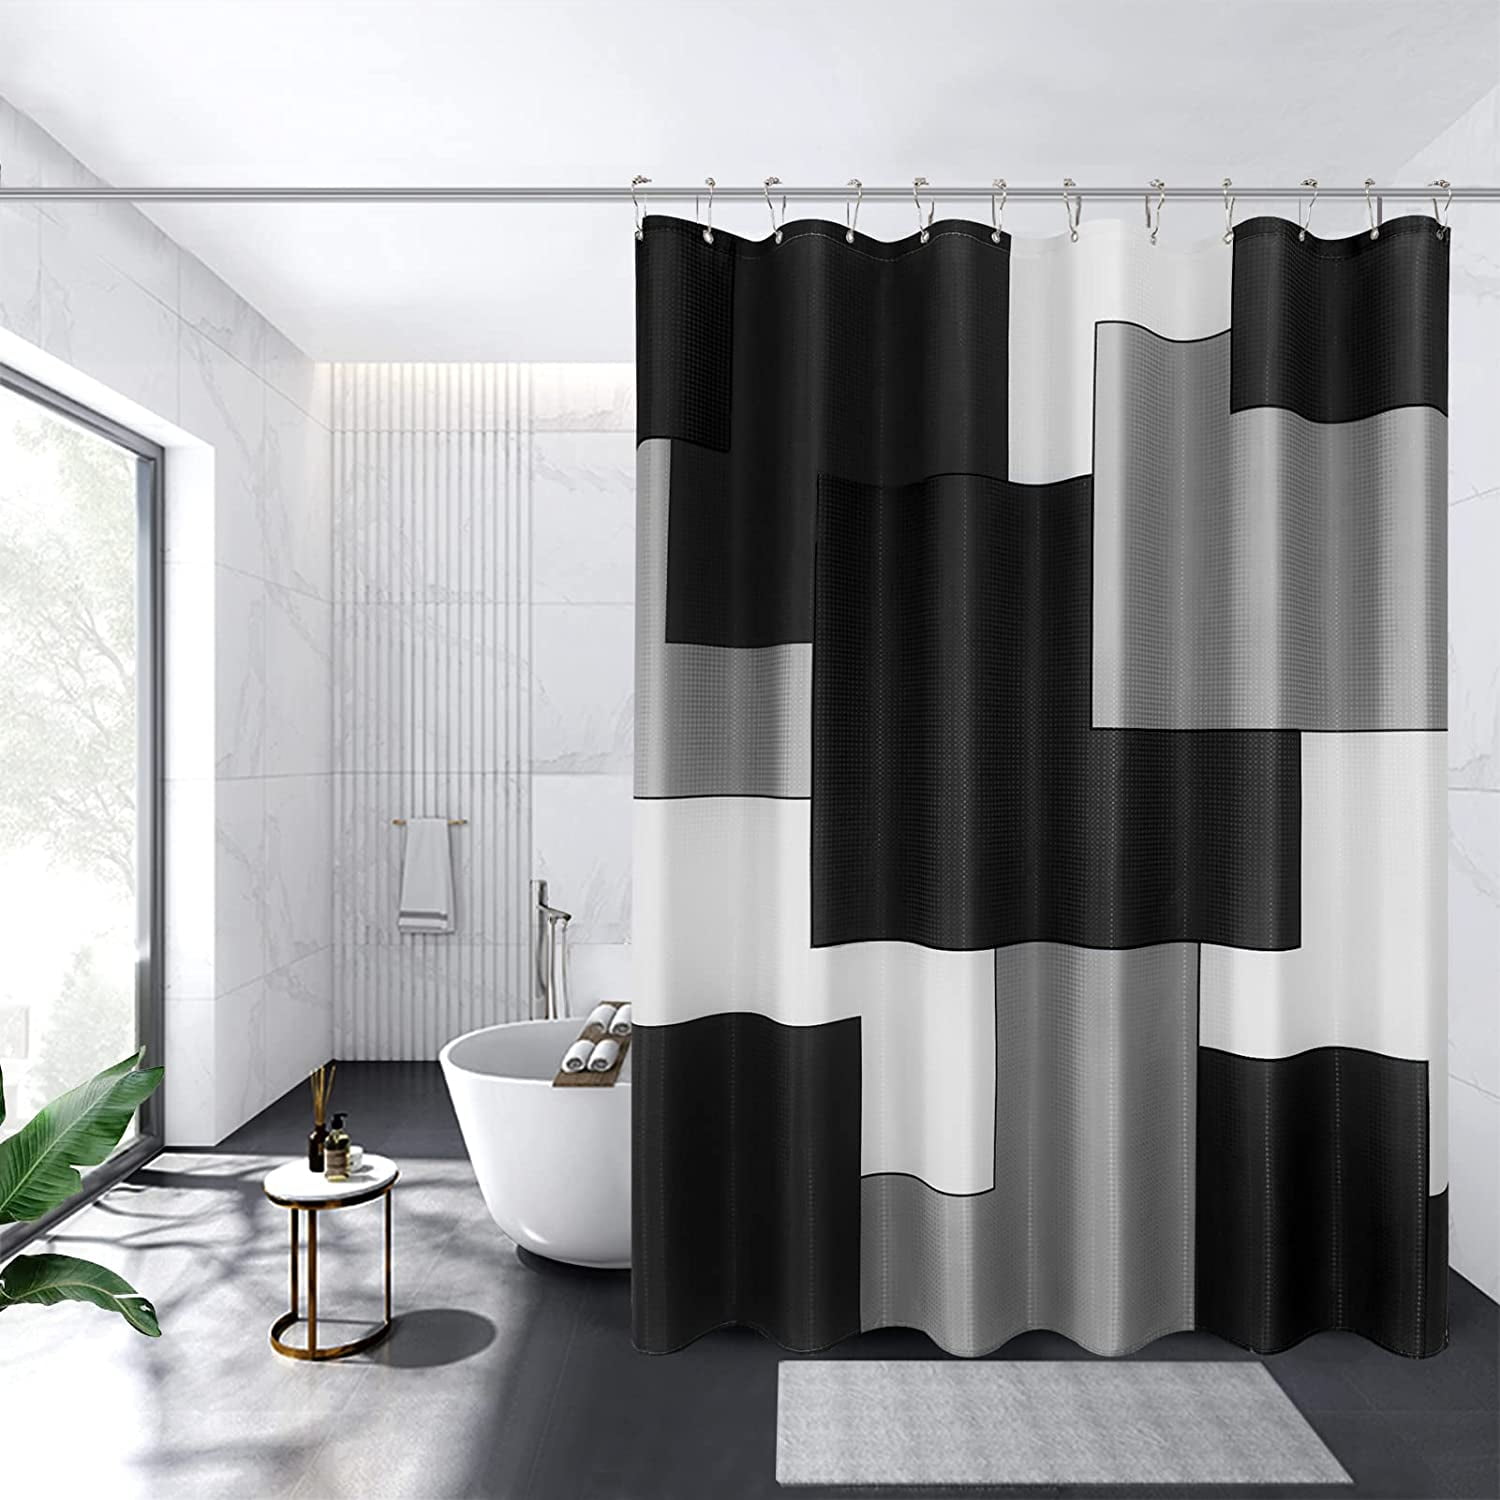 Shower Curtain Black and White Shower Curtain Mordern Shower Curtain ...